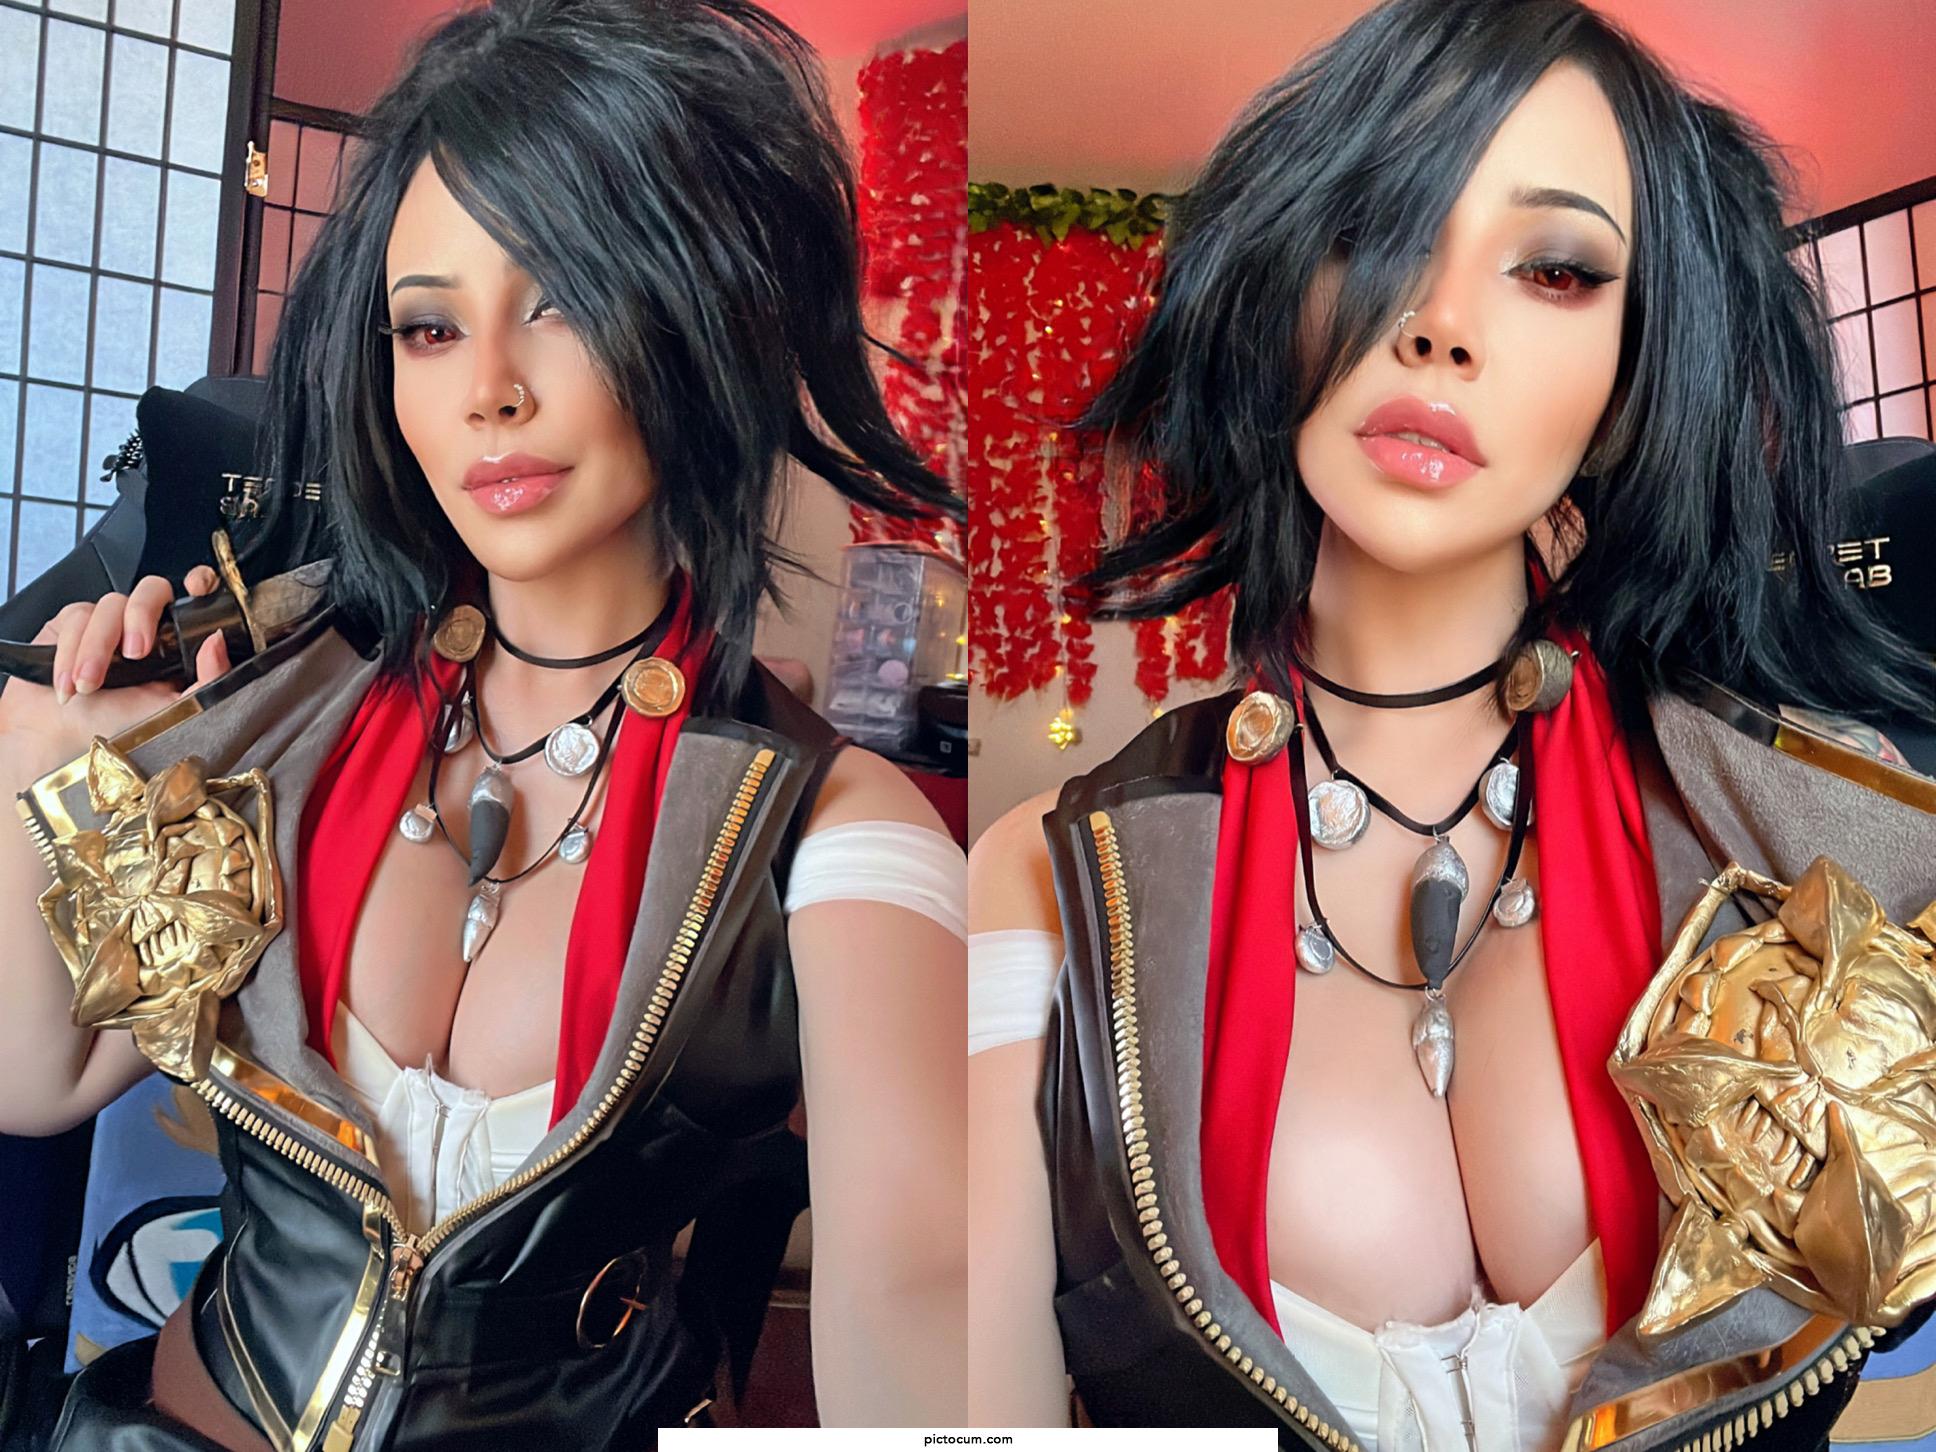 Blackfang closet cosplay from Lost Ark by Felicia Vox